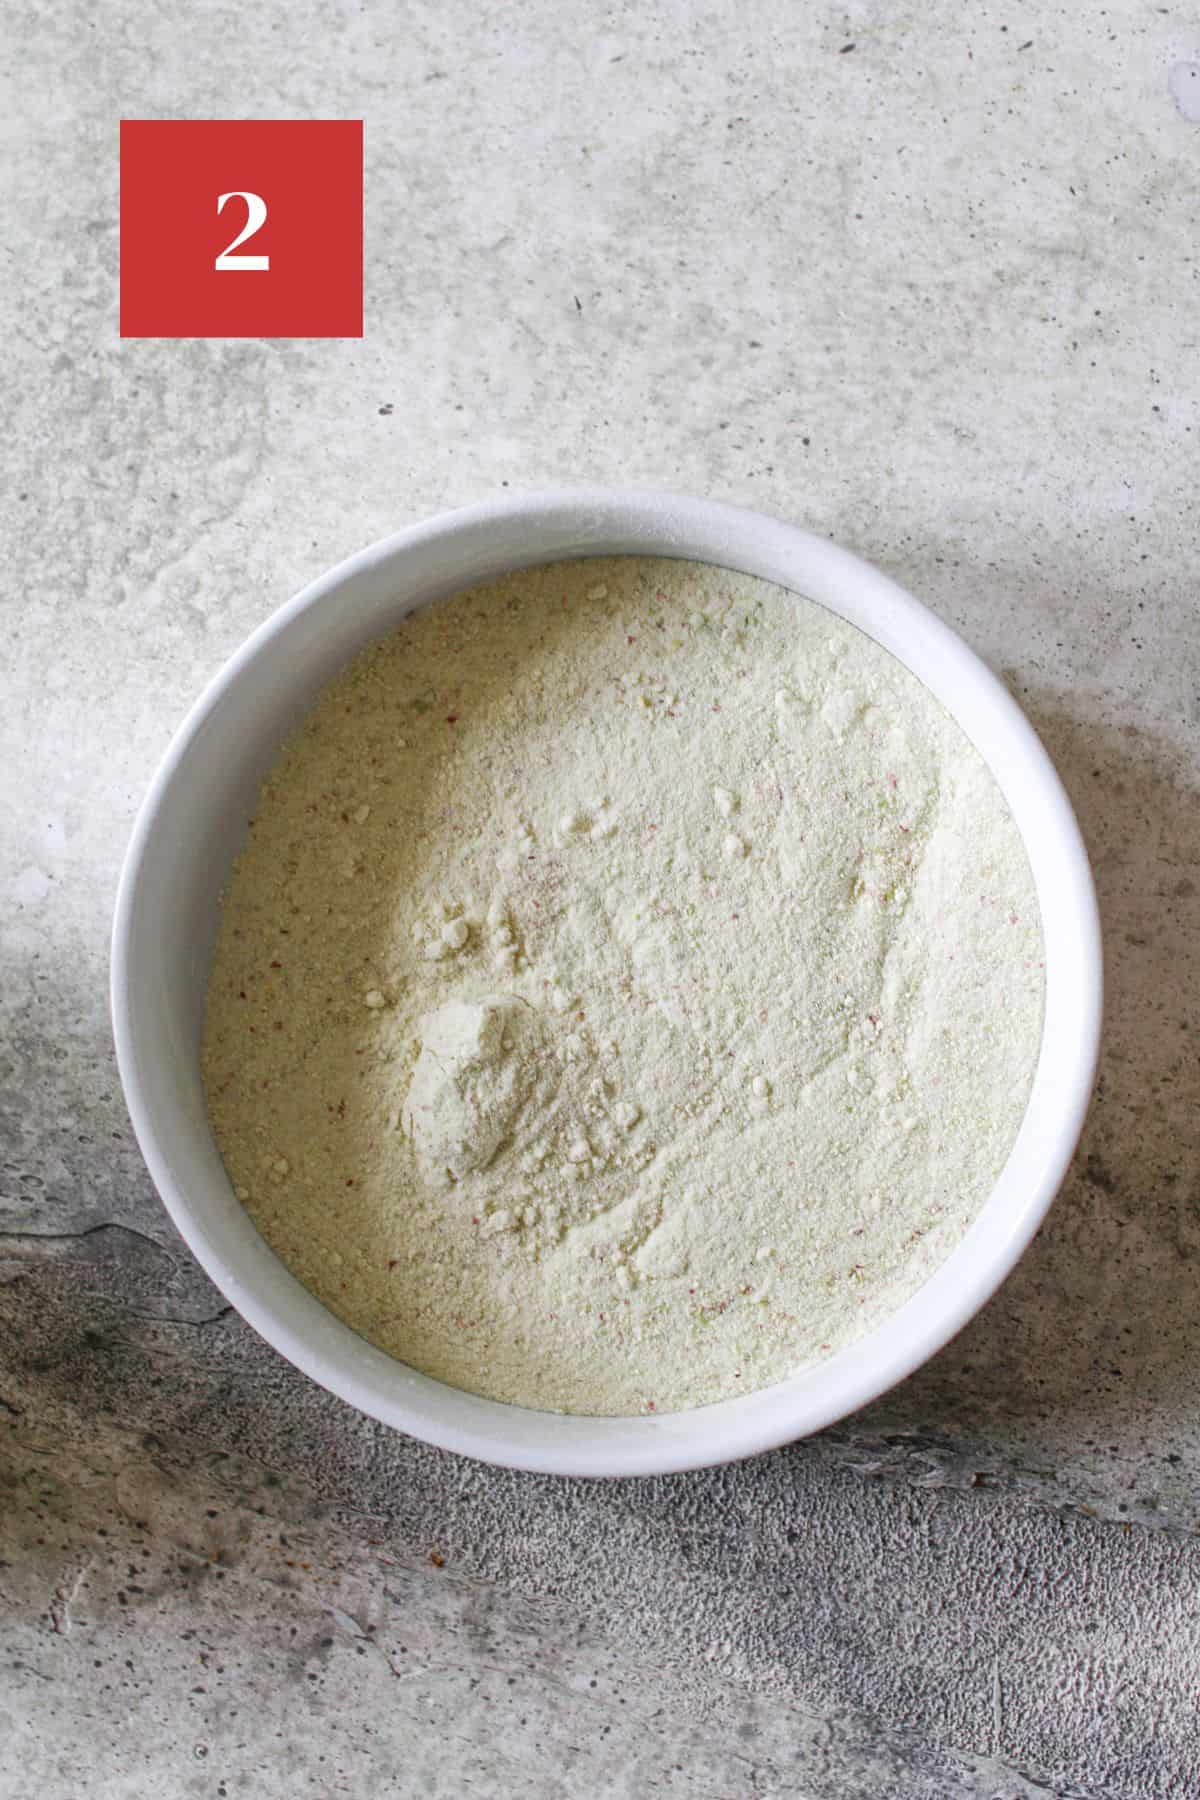 A white bowl with freeze dried apple powder on a cement background. In the upper left corner is a dark red square with a white '2' in the center.